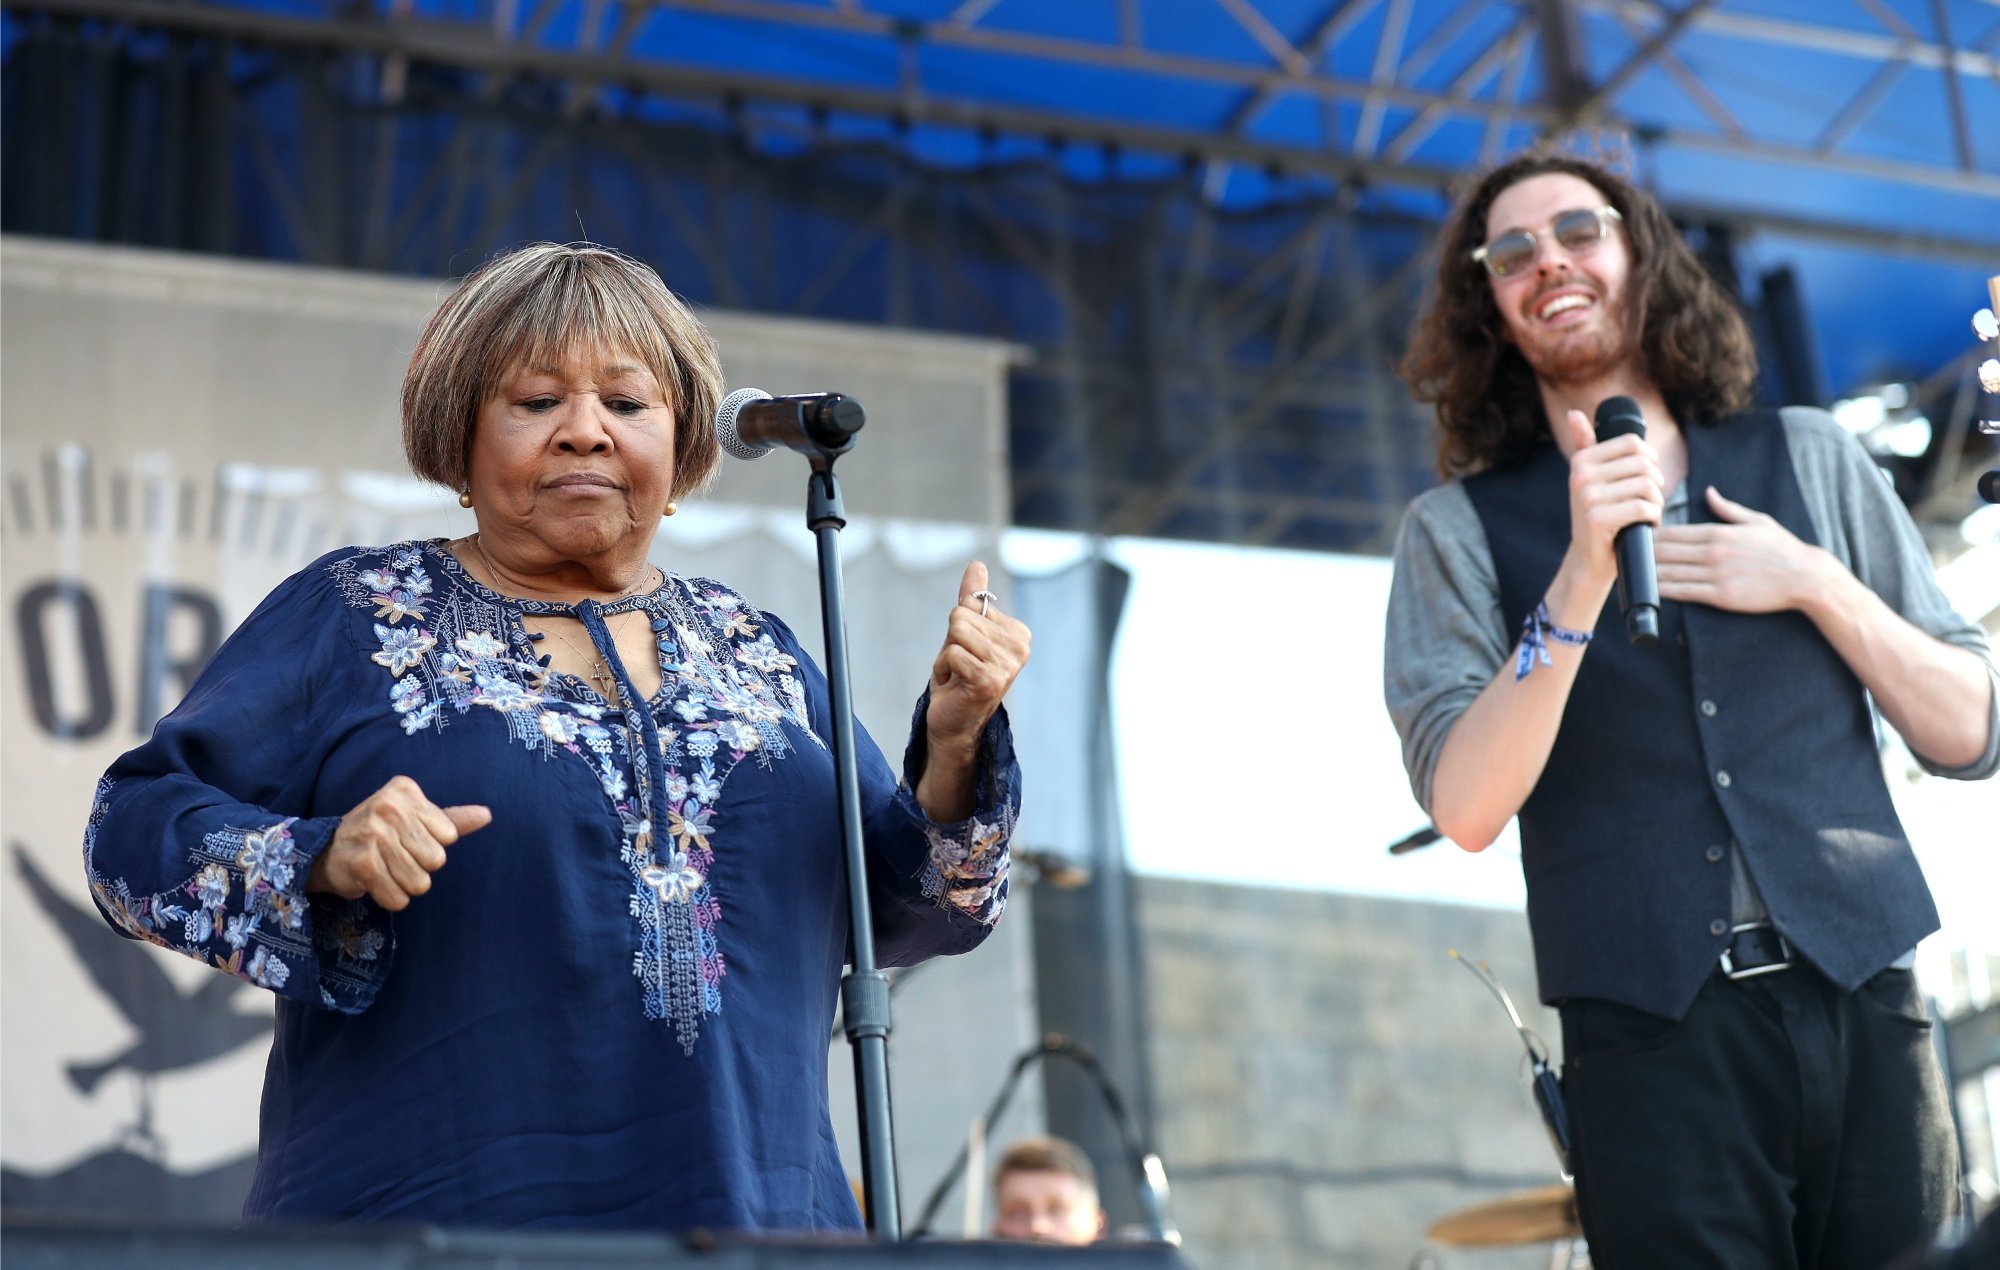 Watch Hozier cover The Band with Mavis Staples, Joan Baez and more at Newport Folk Festival